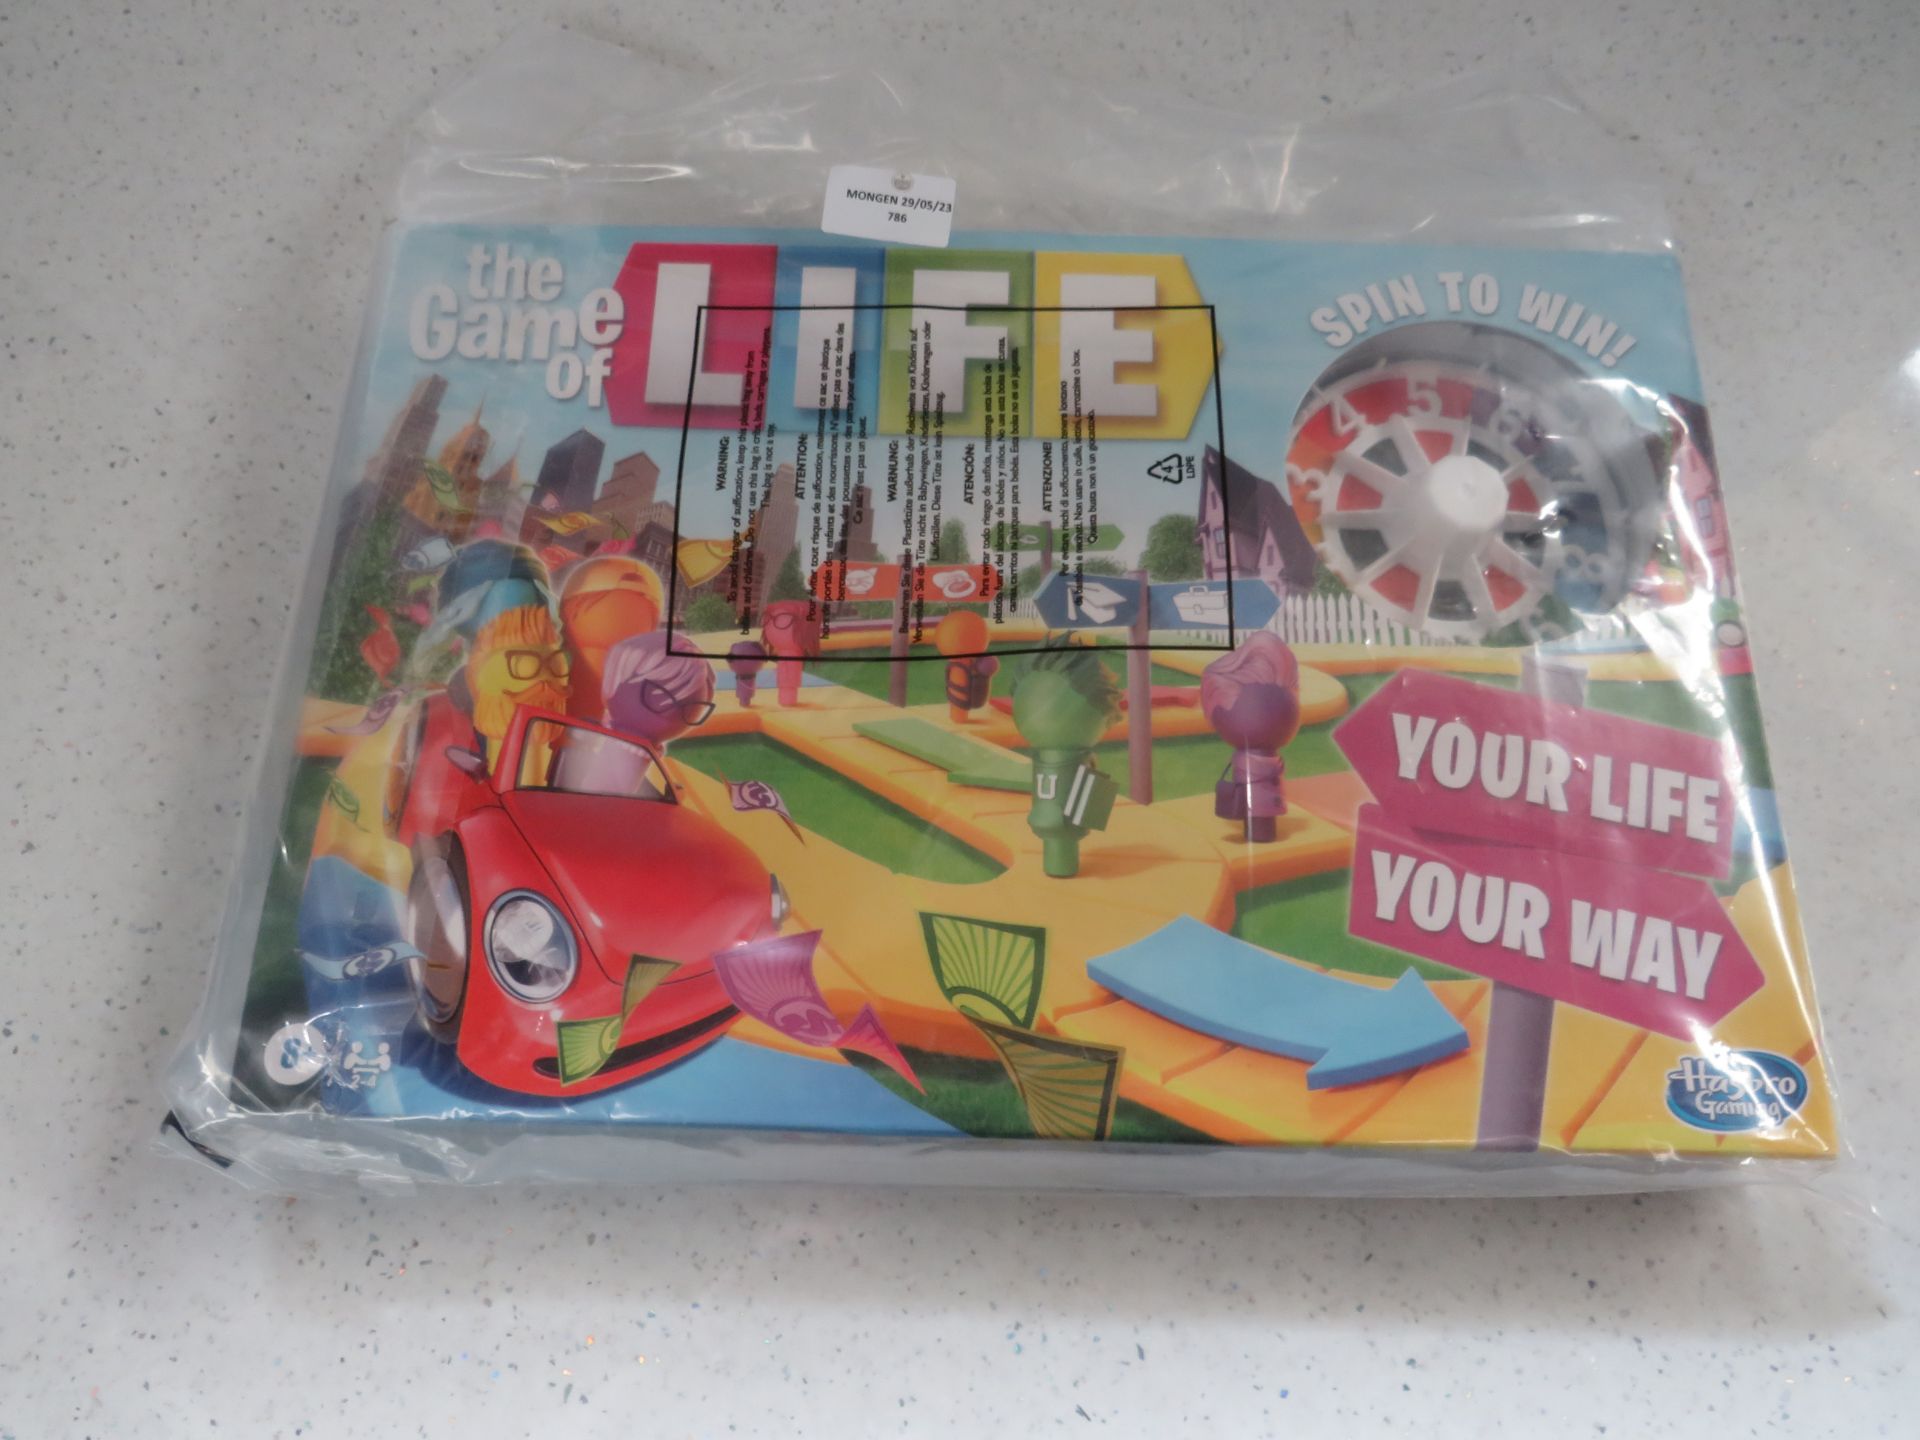 Hasbro - The Game Of Life - Unchecked & Boxed.